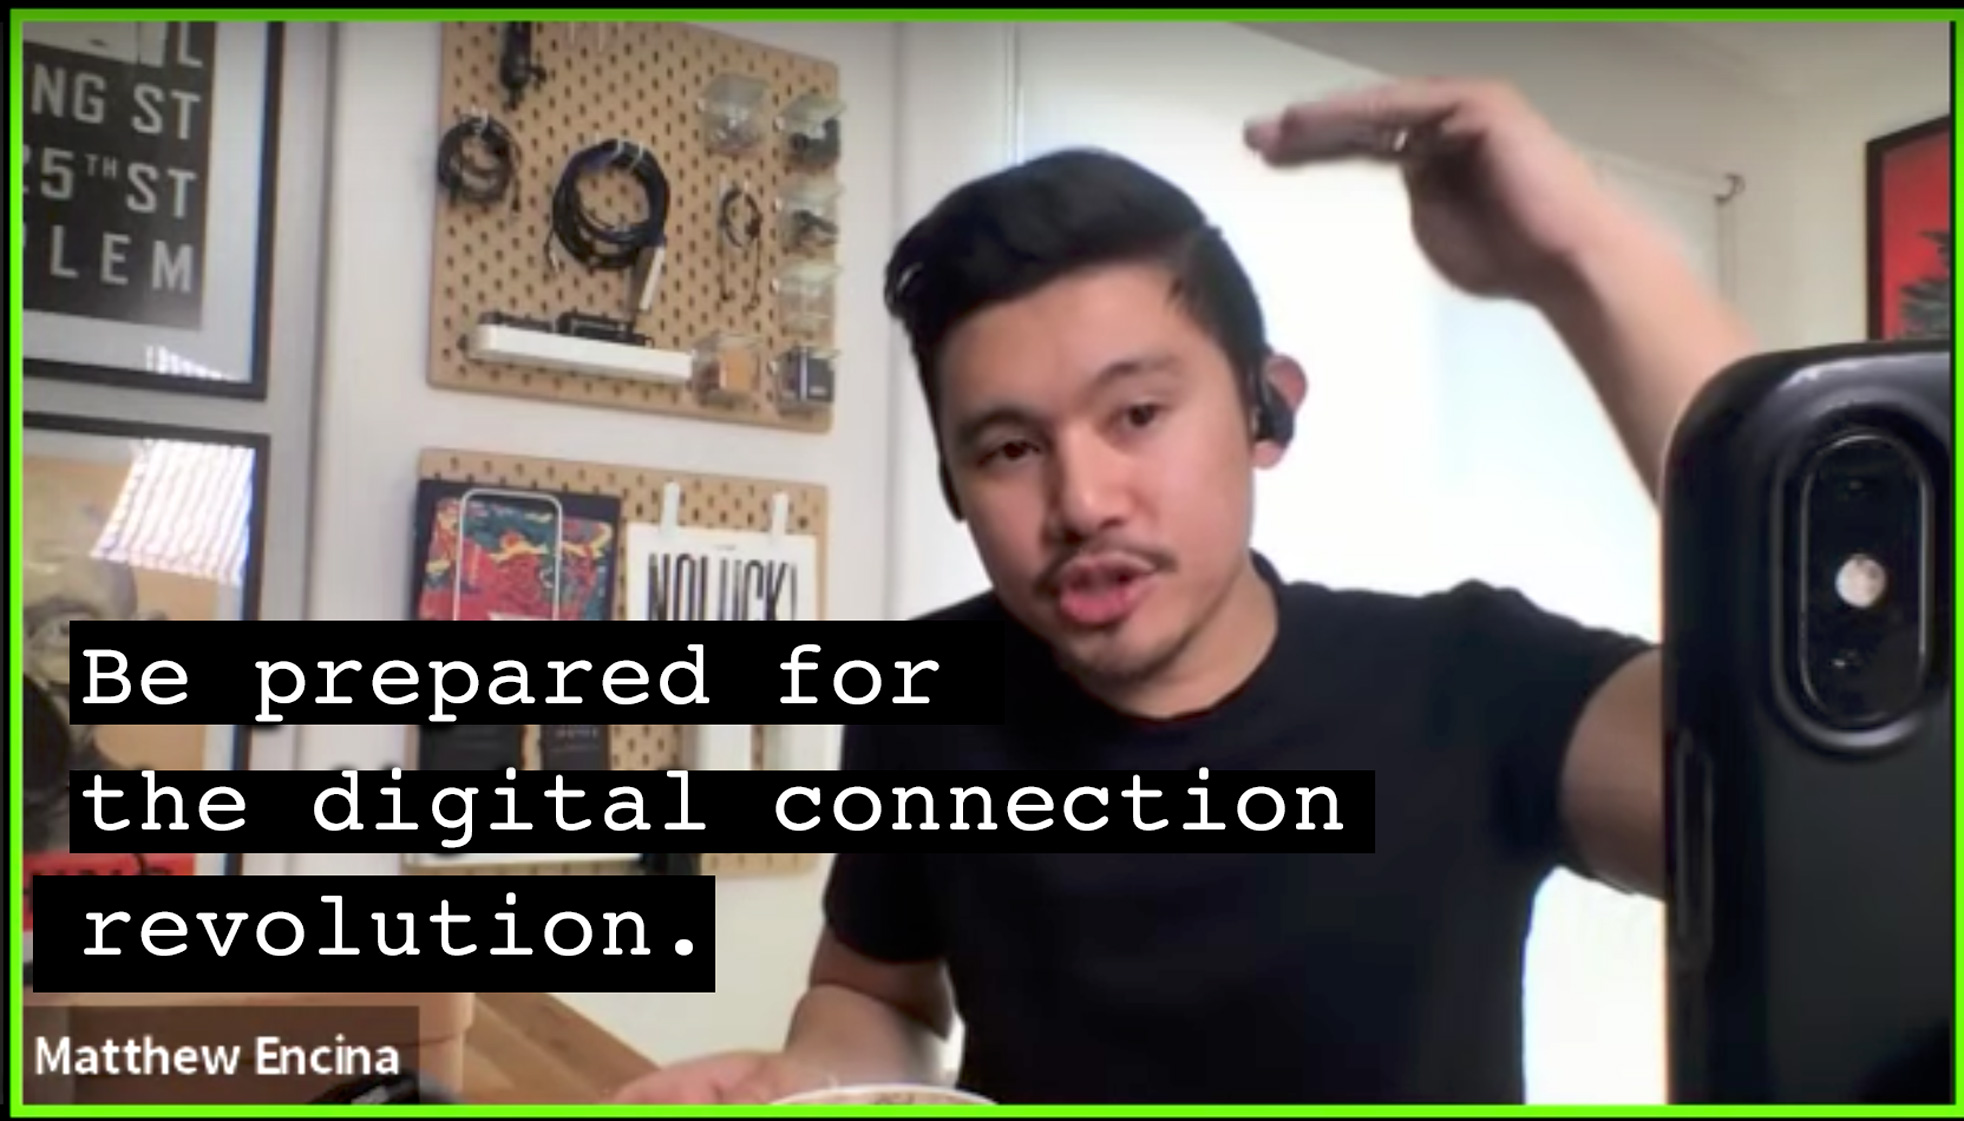 Read more on Be Prepared for the Digital Connection Revolution: Business Interview with Matthew Encina